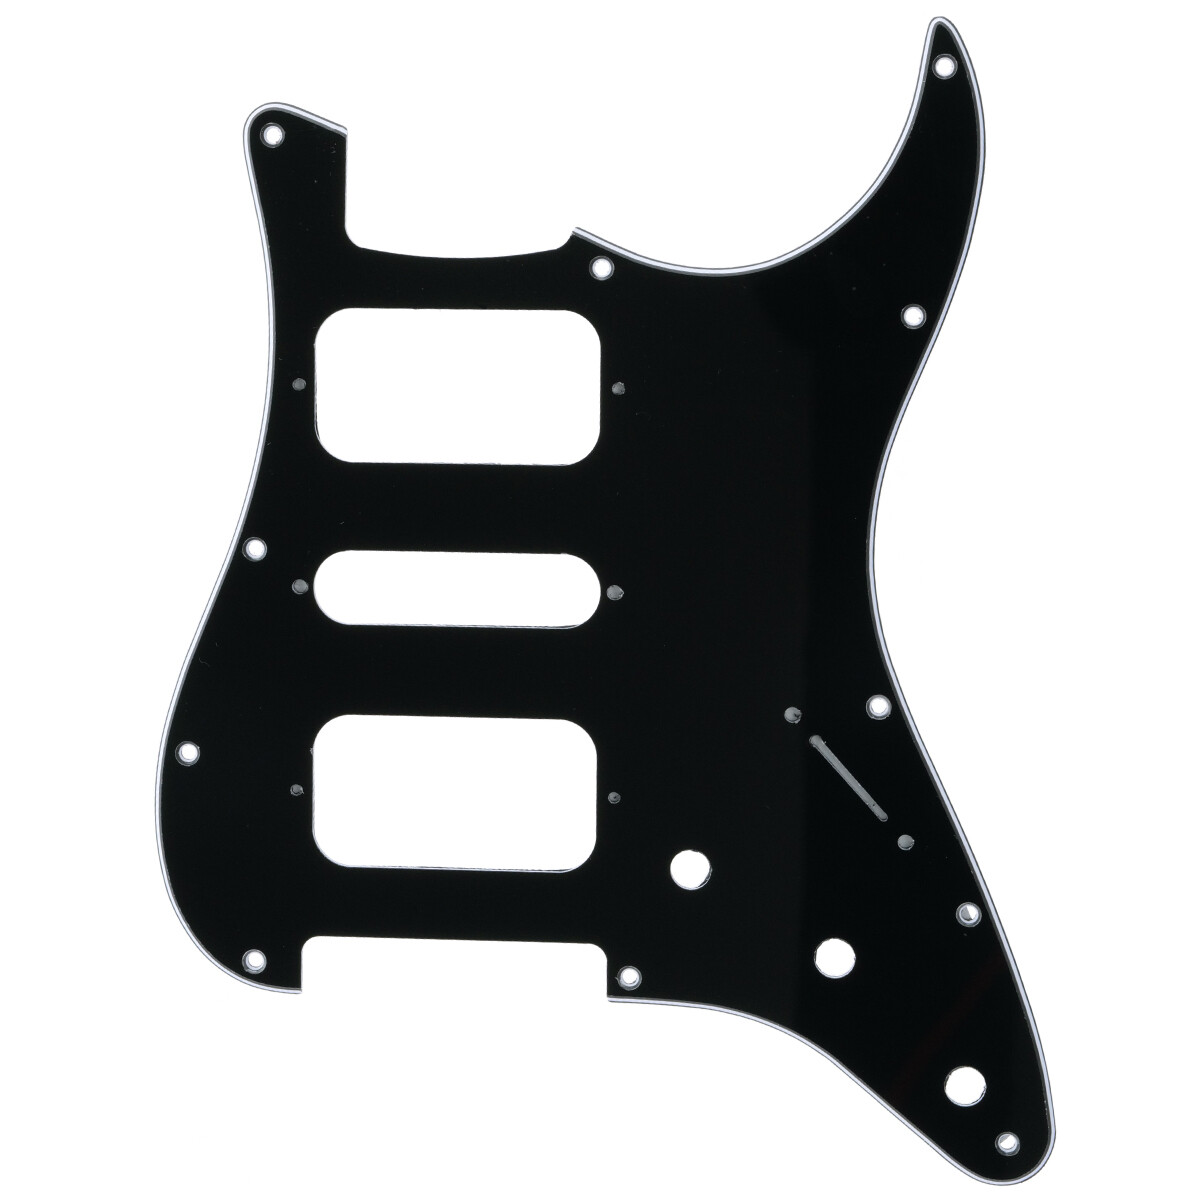 Brio HSH Strat® (Rounded Corners)
11 Hole 3 Ply Black